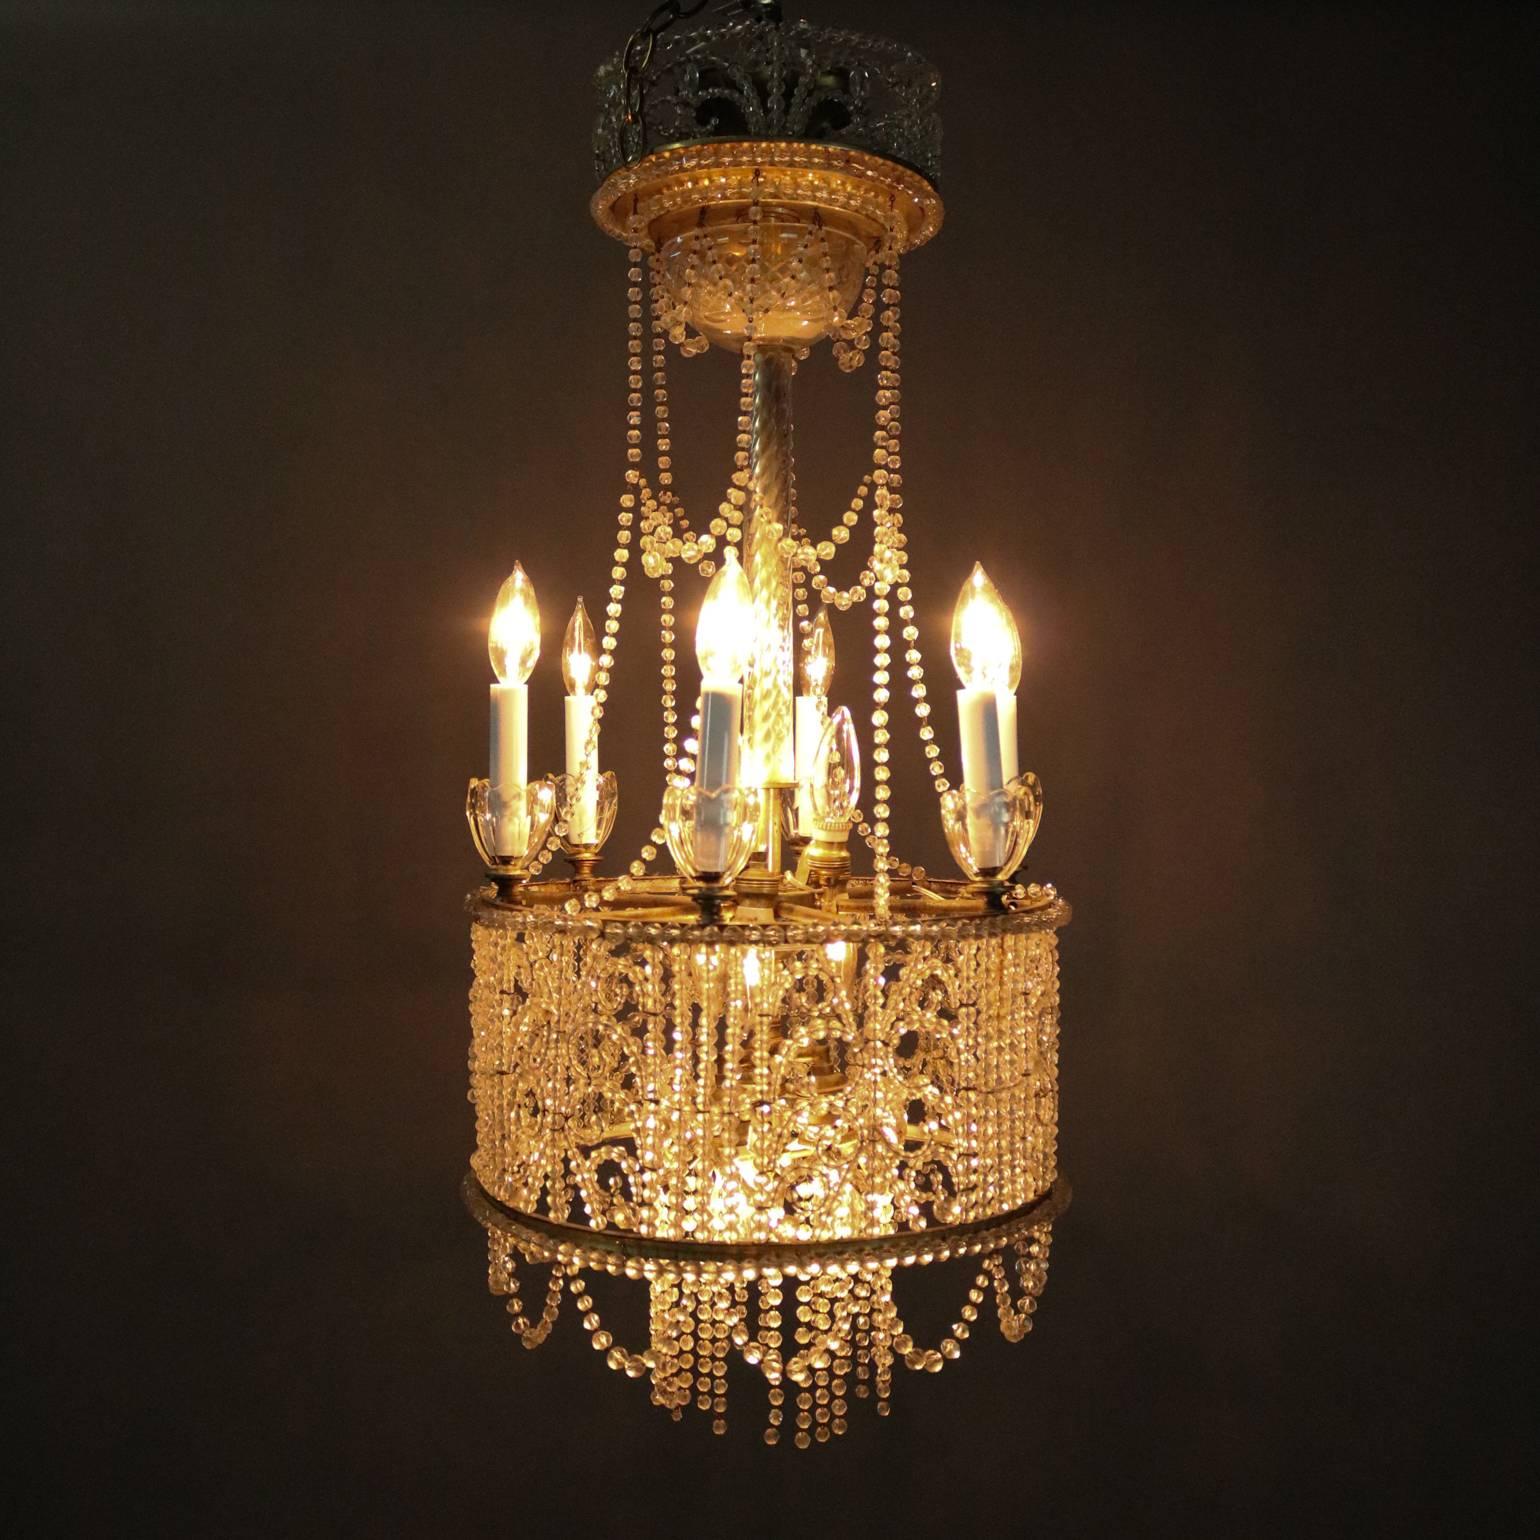 Antique French Art Nouveau chandelier features strung crystal beads in feathered, scroll and swag patterns, reminiscent of wedding cake, circa 1920

Measures: 36" drop x 16"diameter.